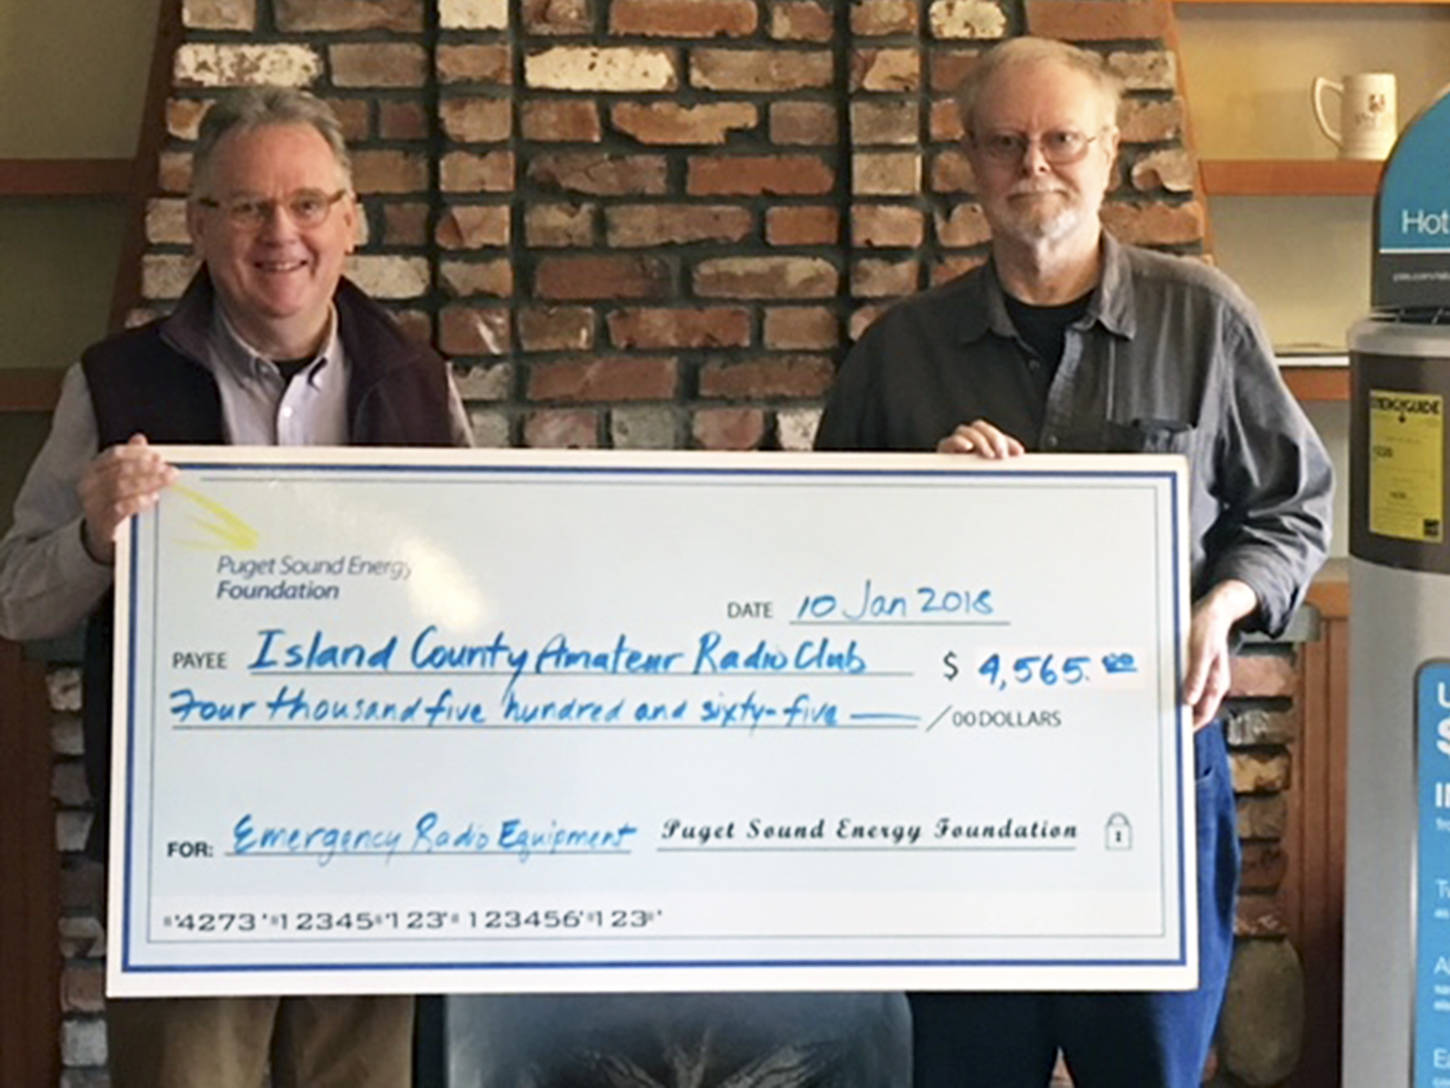 Contributed photo                                Walt Blackford (left), Puget Sound Energy regional outreach manager, presented a grant of $4,565 from the Puget Sound Energy Foundation to John Acton of the Island County Amateur Radio Club (ICARC).